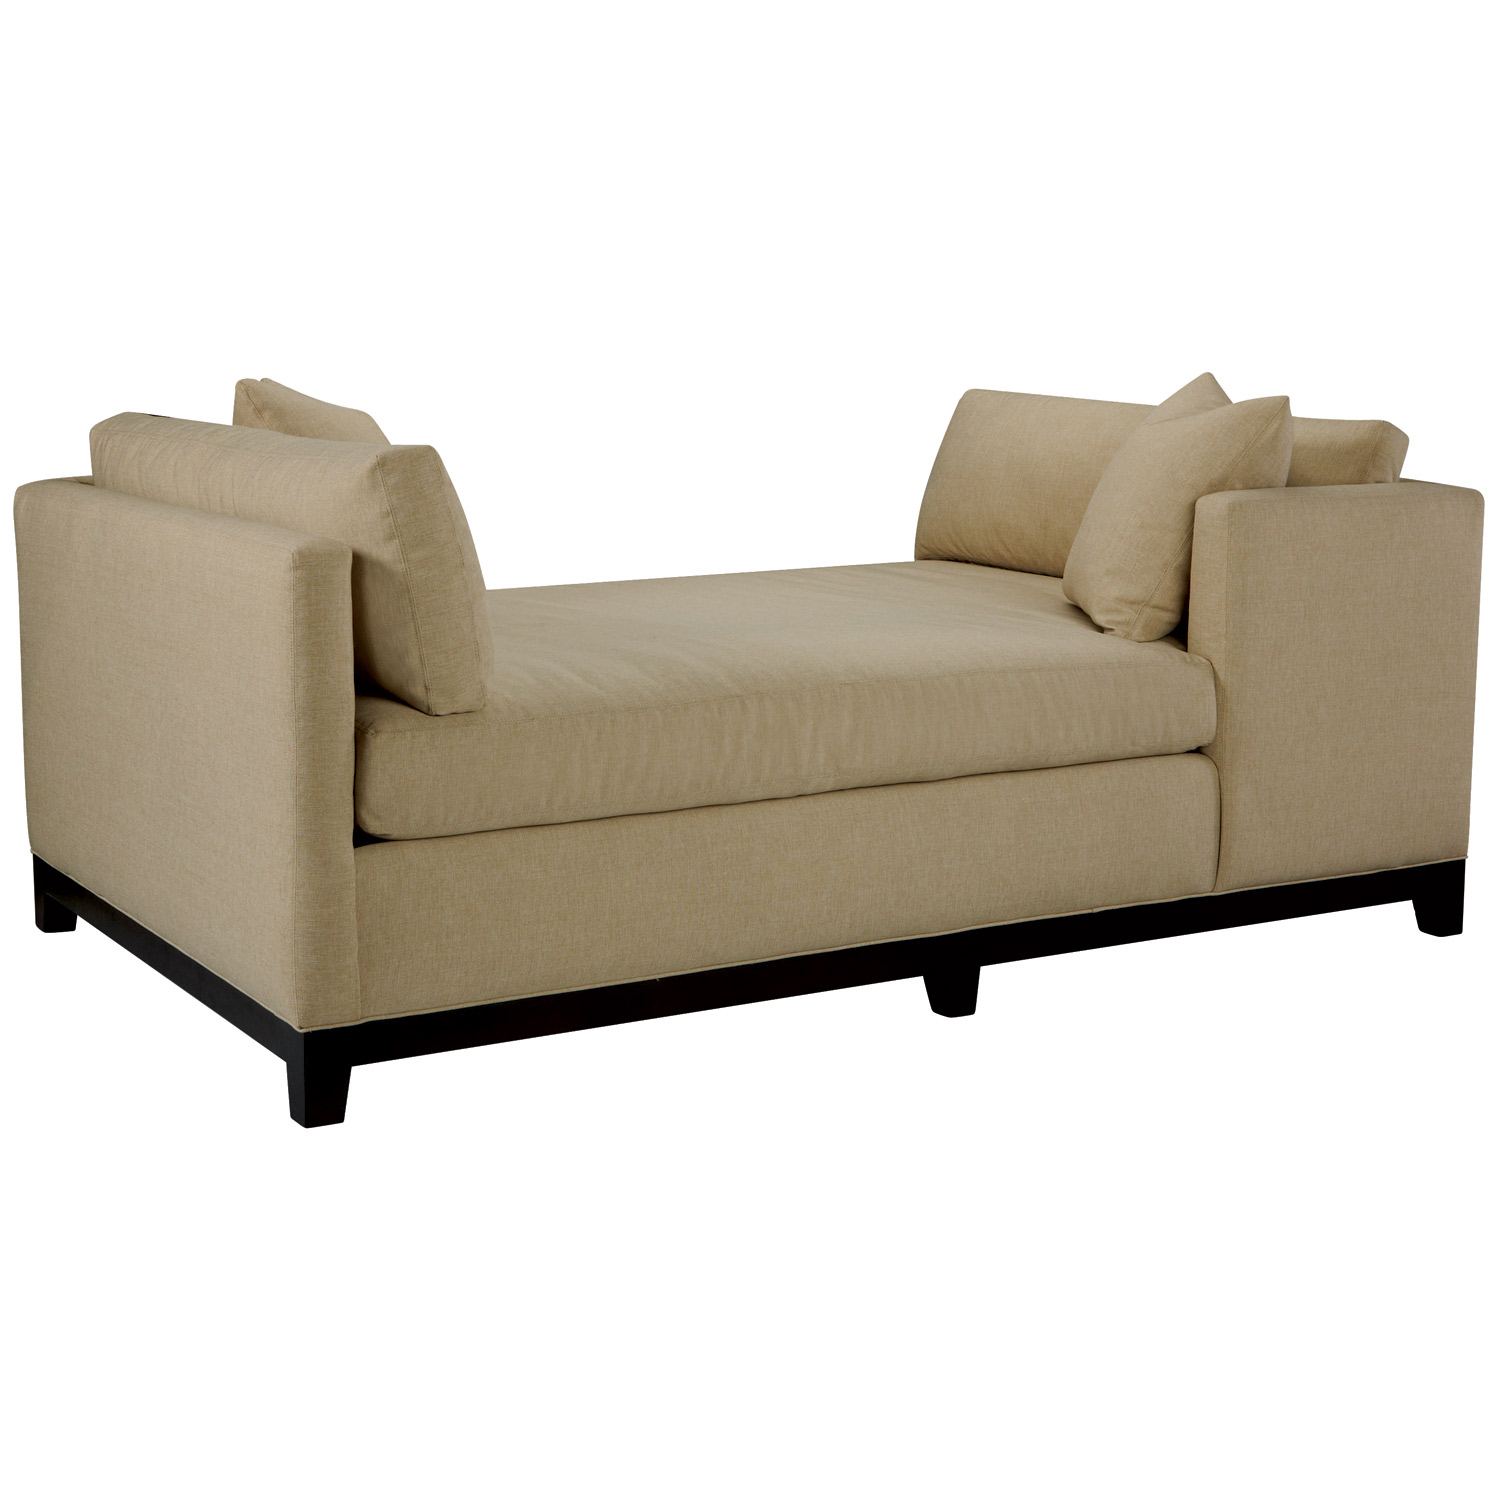 Leather Double Chaise Lounge Foter